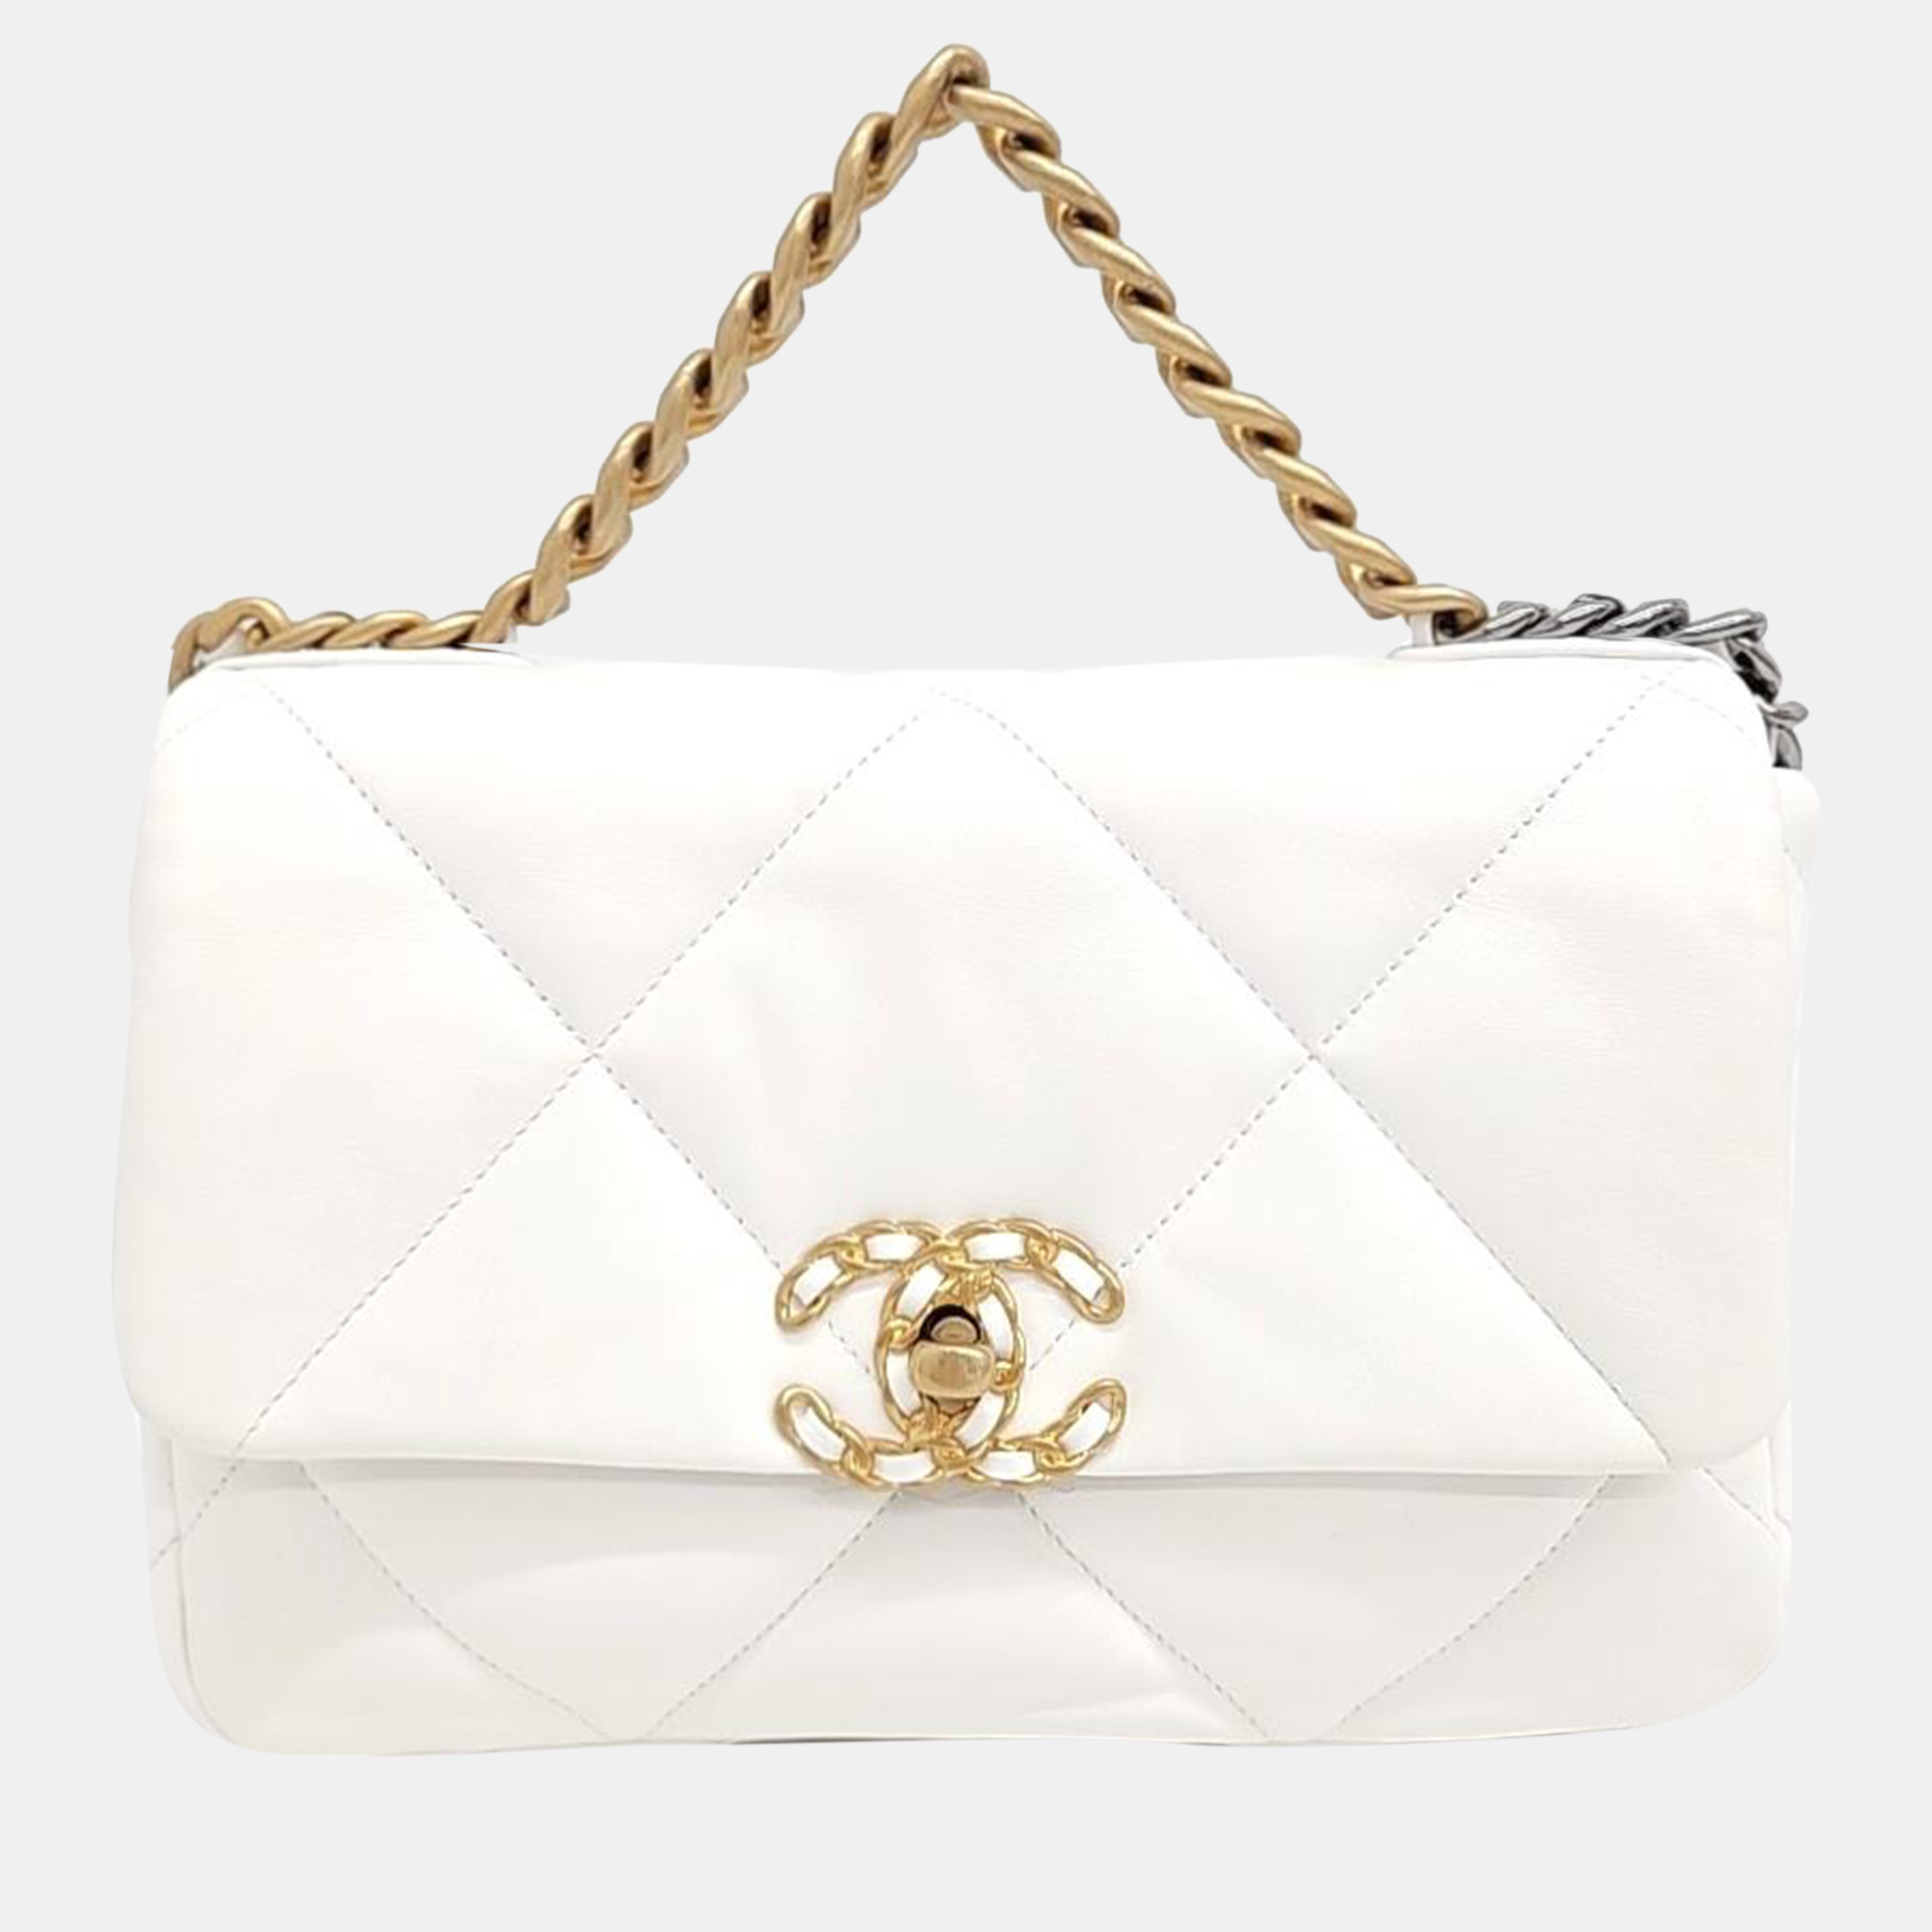 Chanel 19 small flap bag